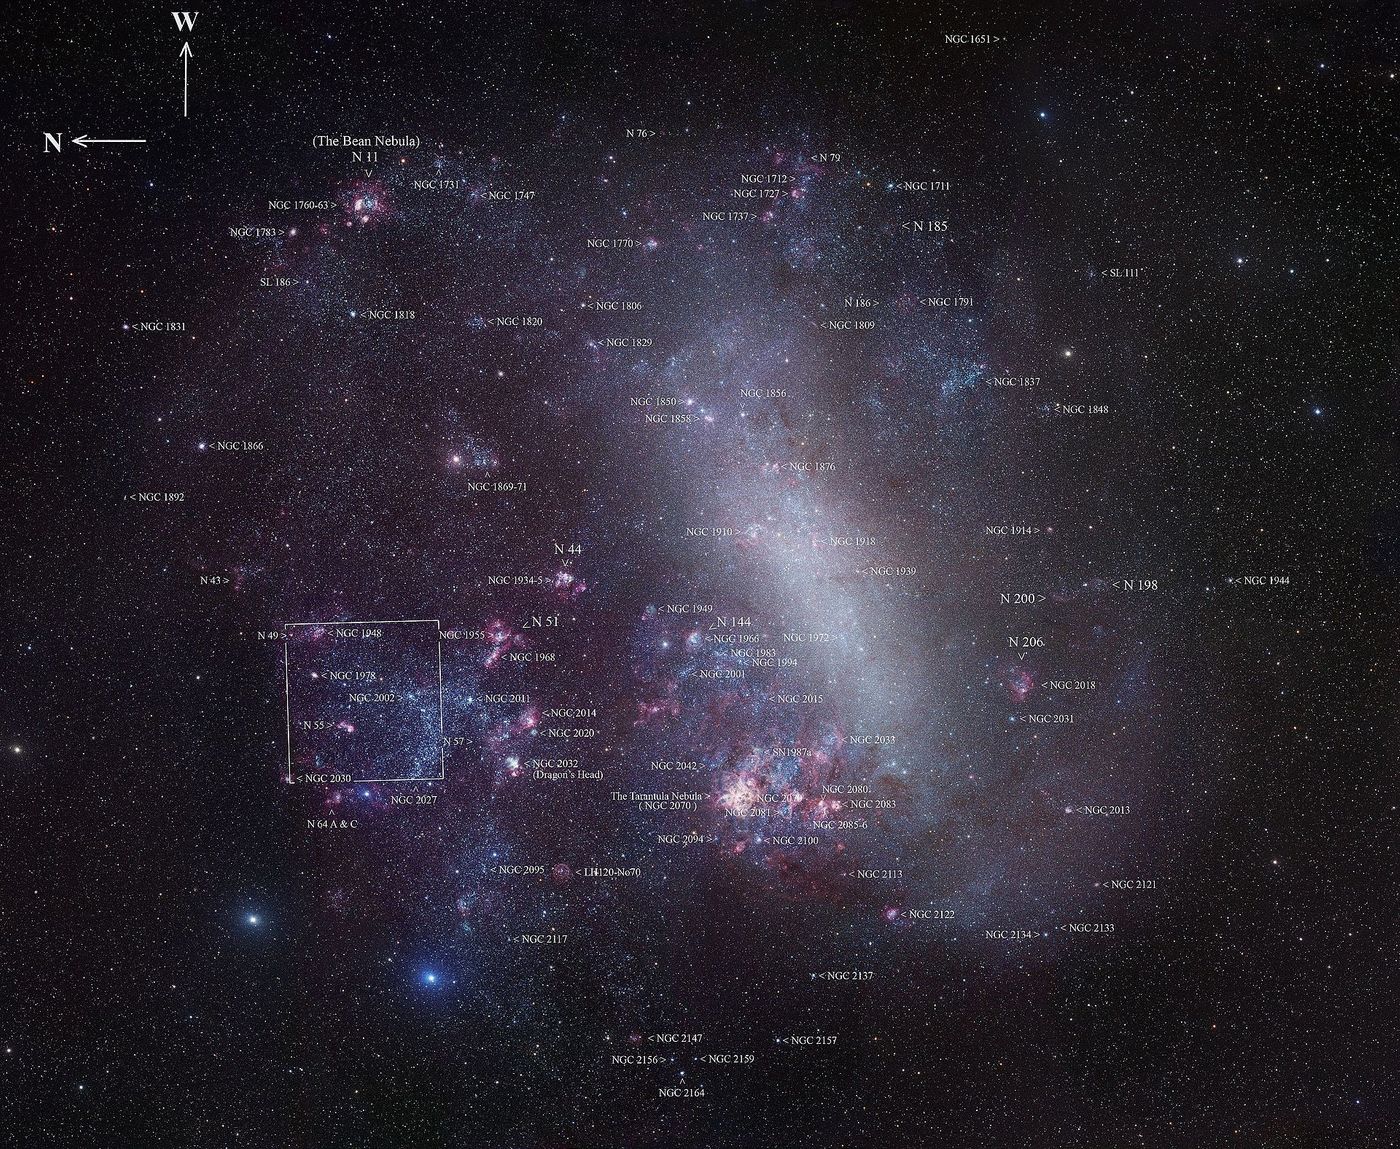 An image depicting the Large Magellanic Cloud and its contents.